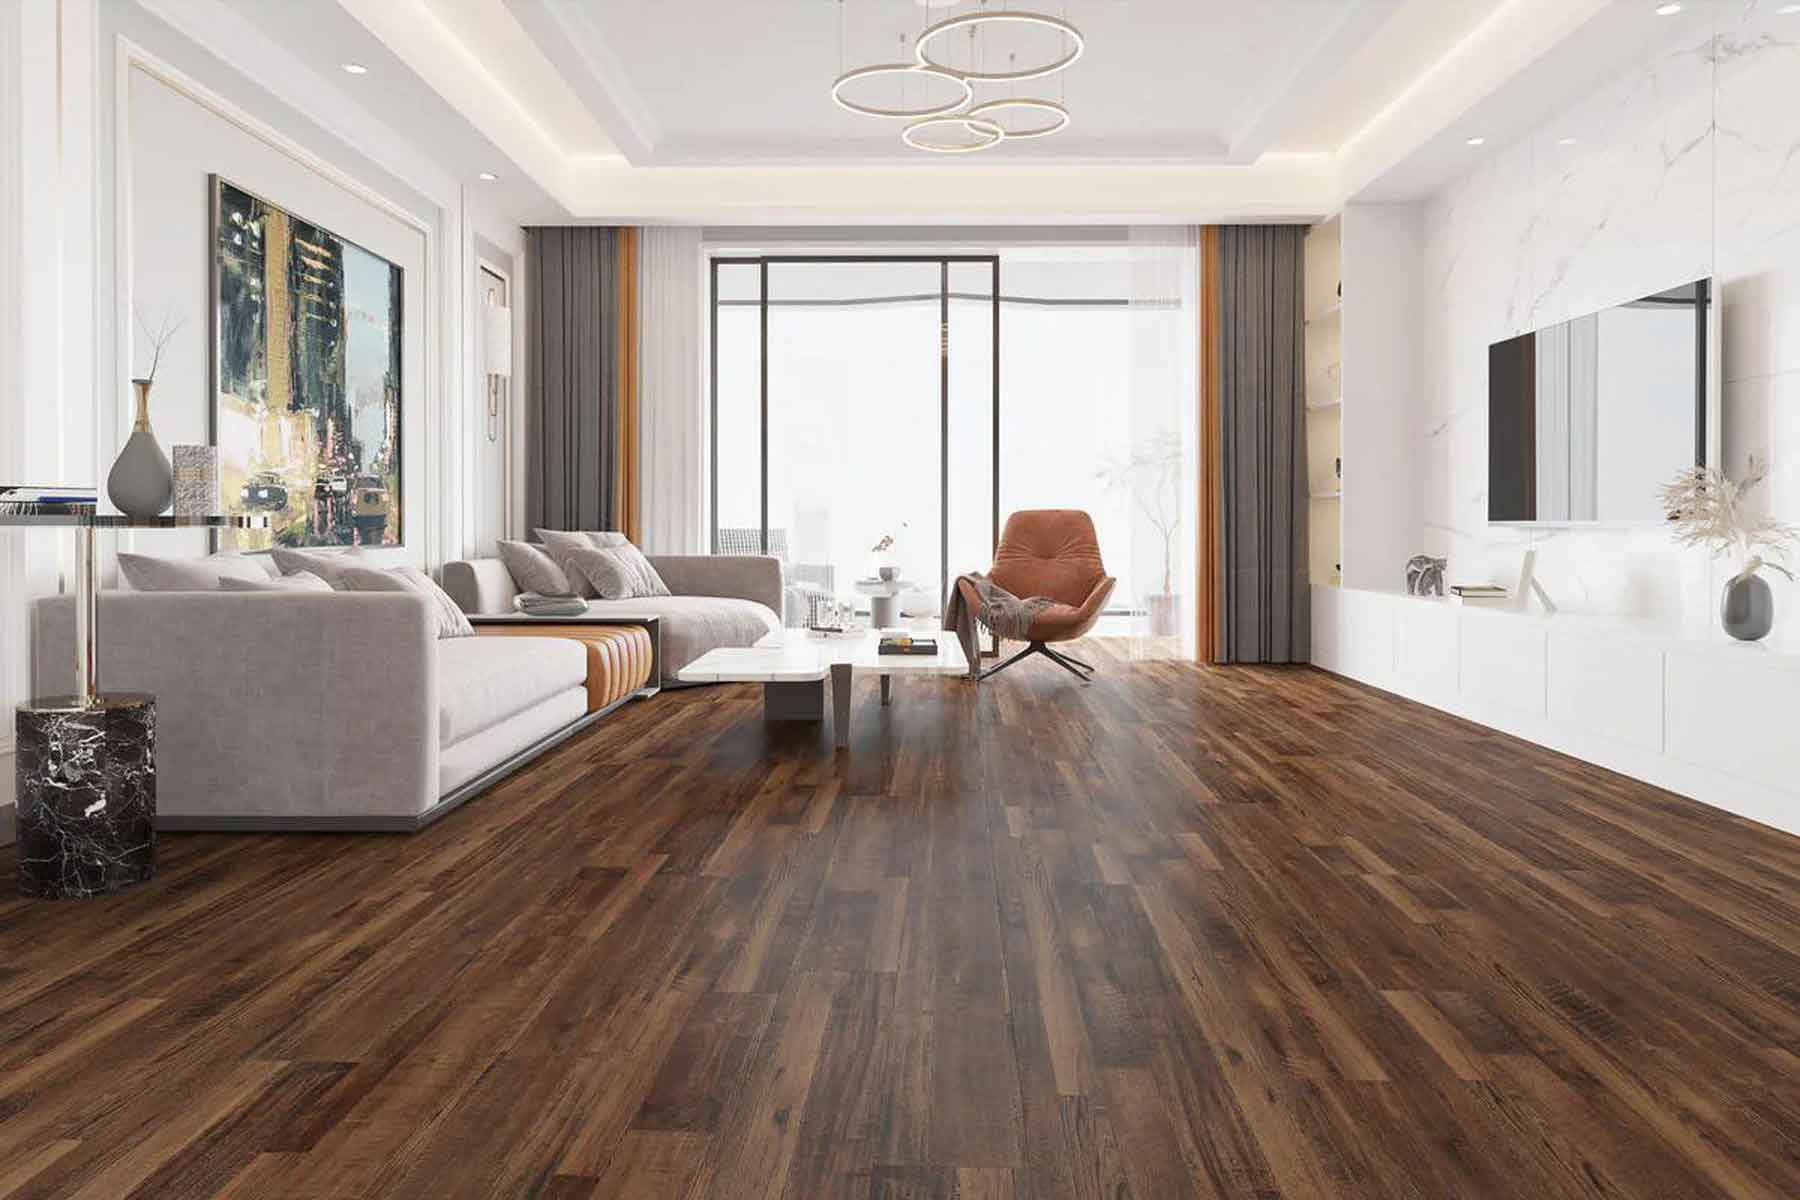 How Much Does Luxury Vinyl Plank (LVP) Flooring Cost? [2023]